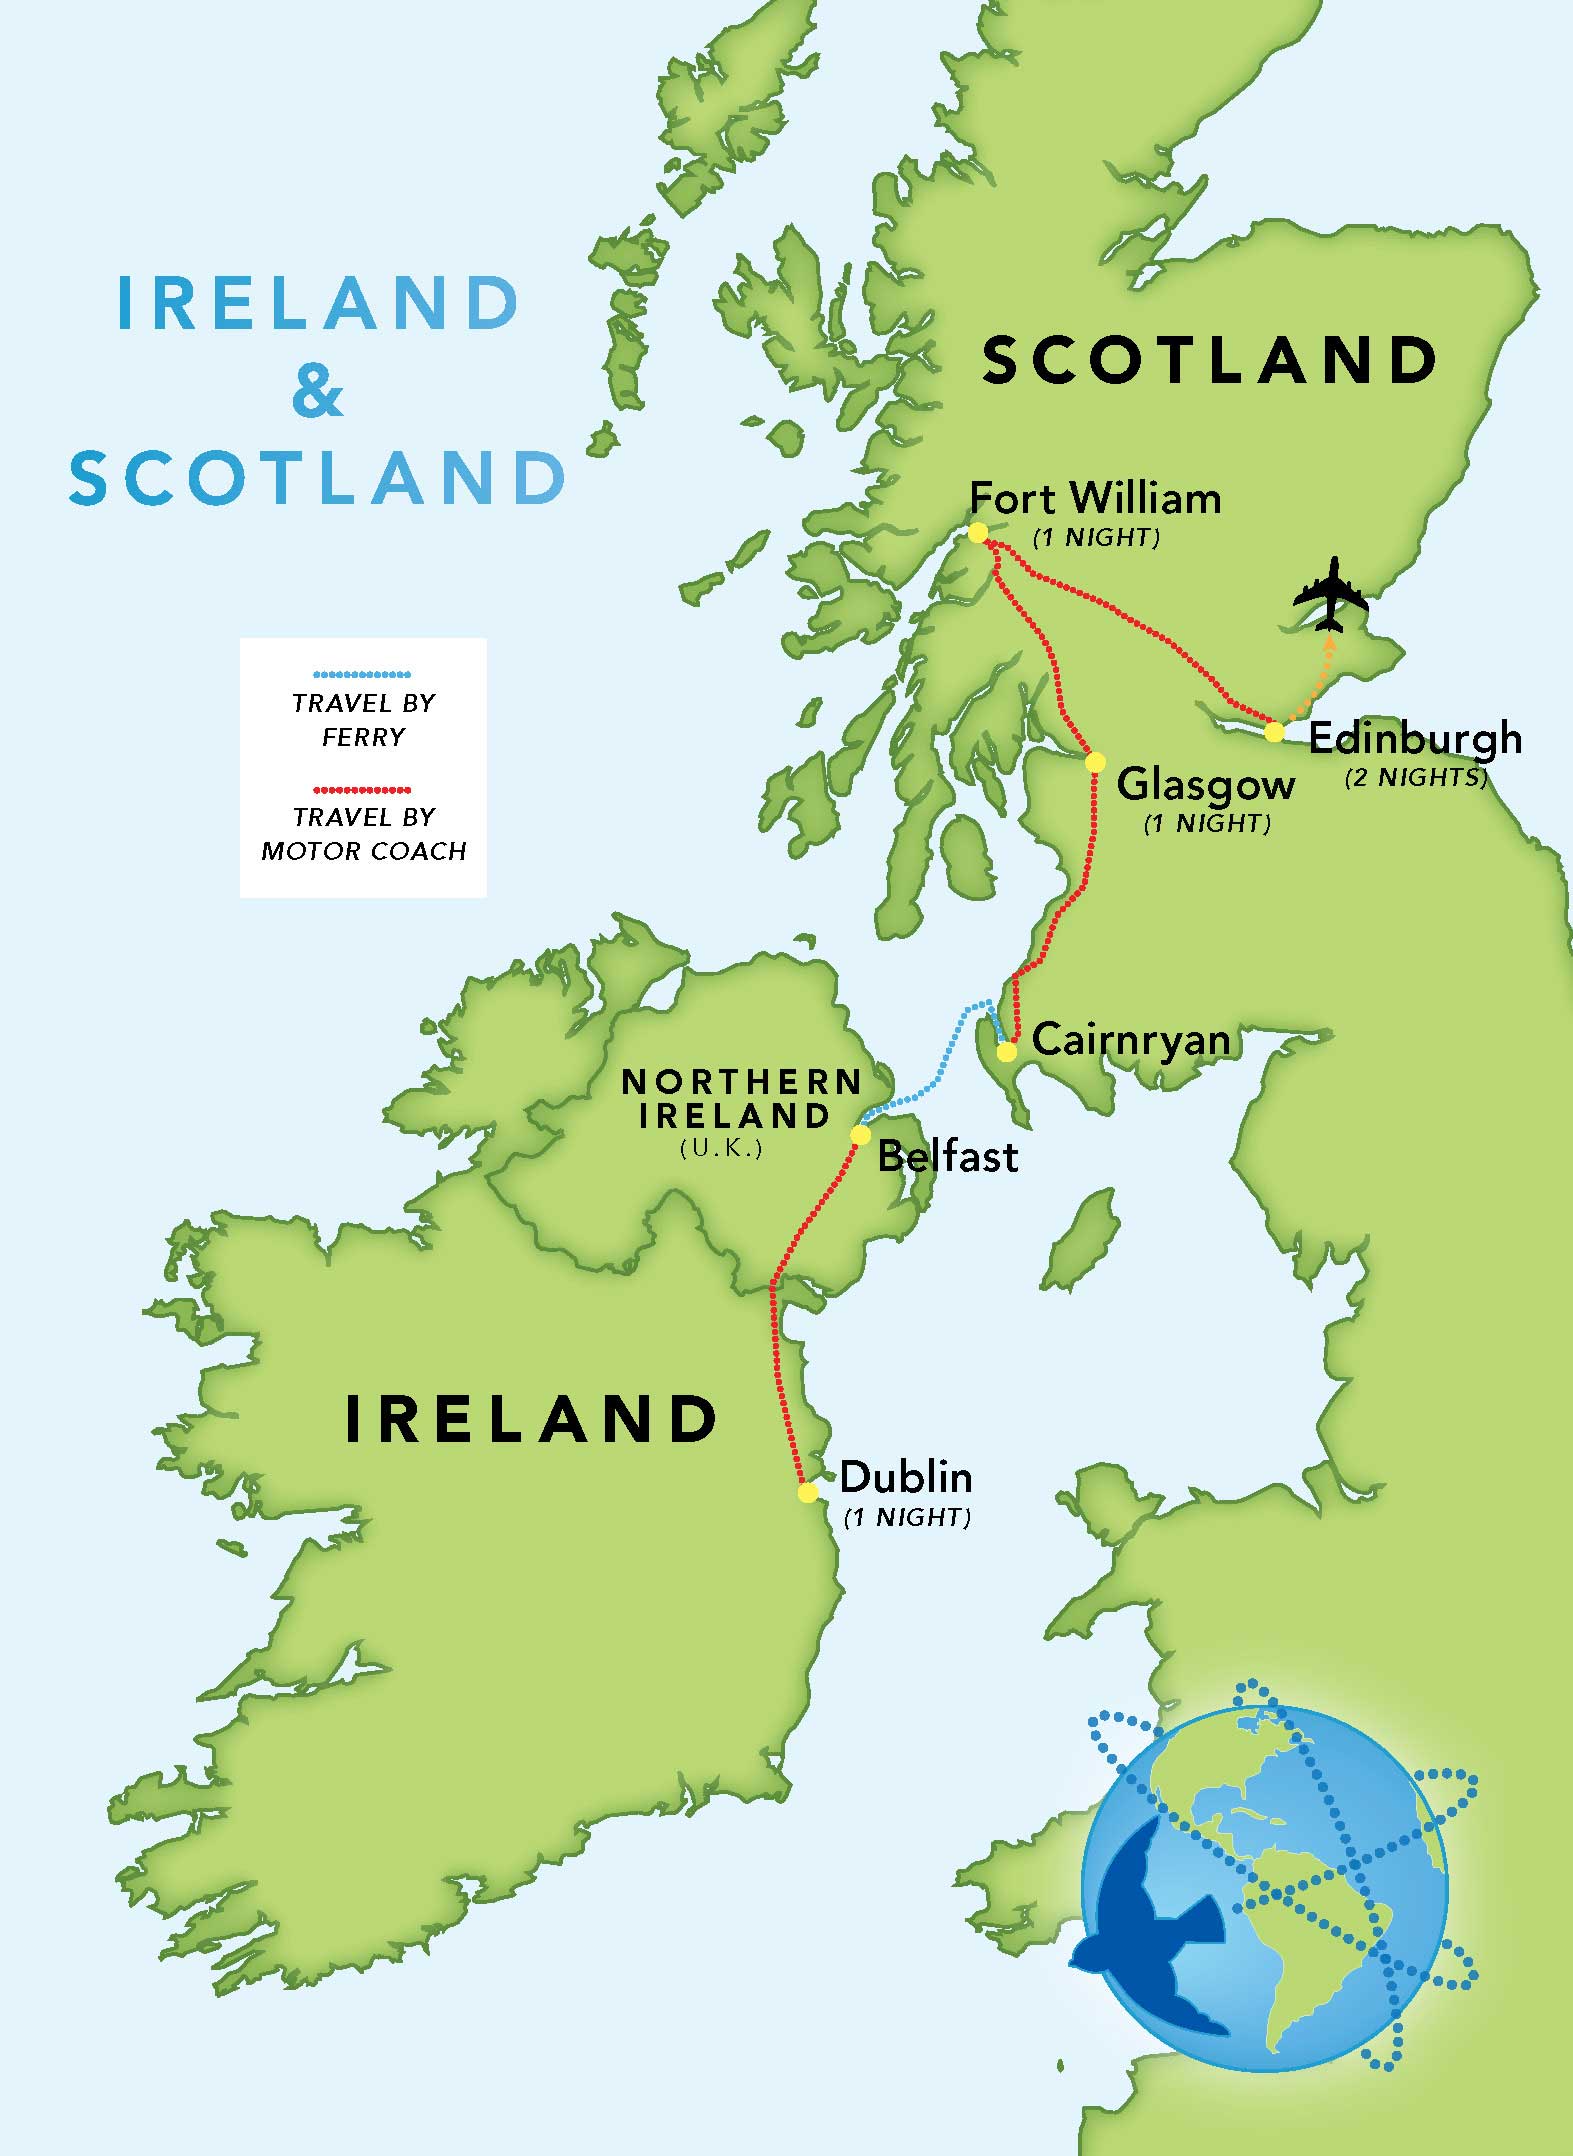 guided tour of scotland and ireland